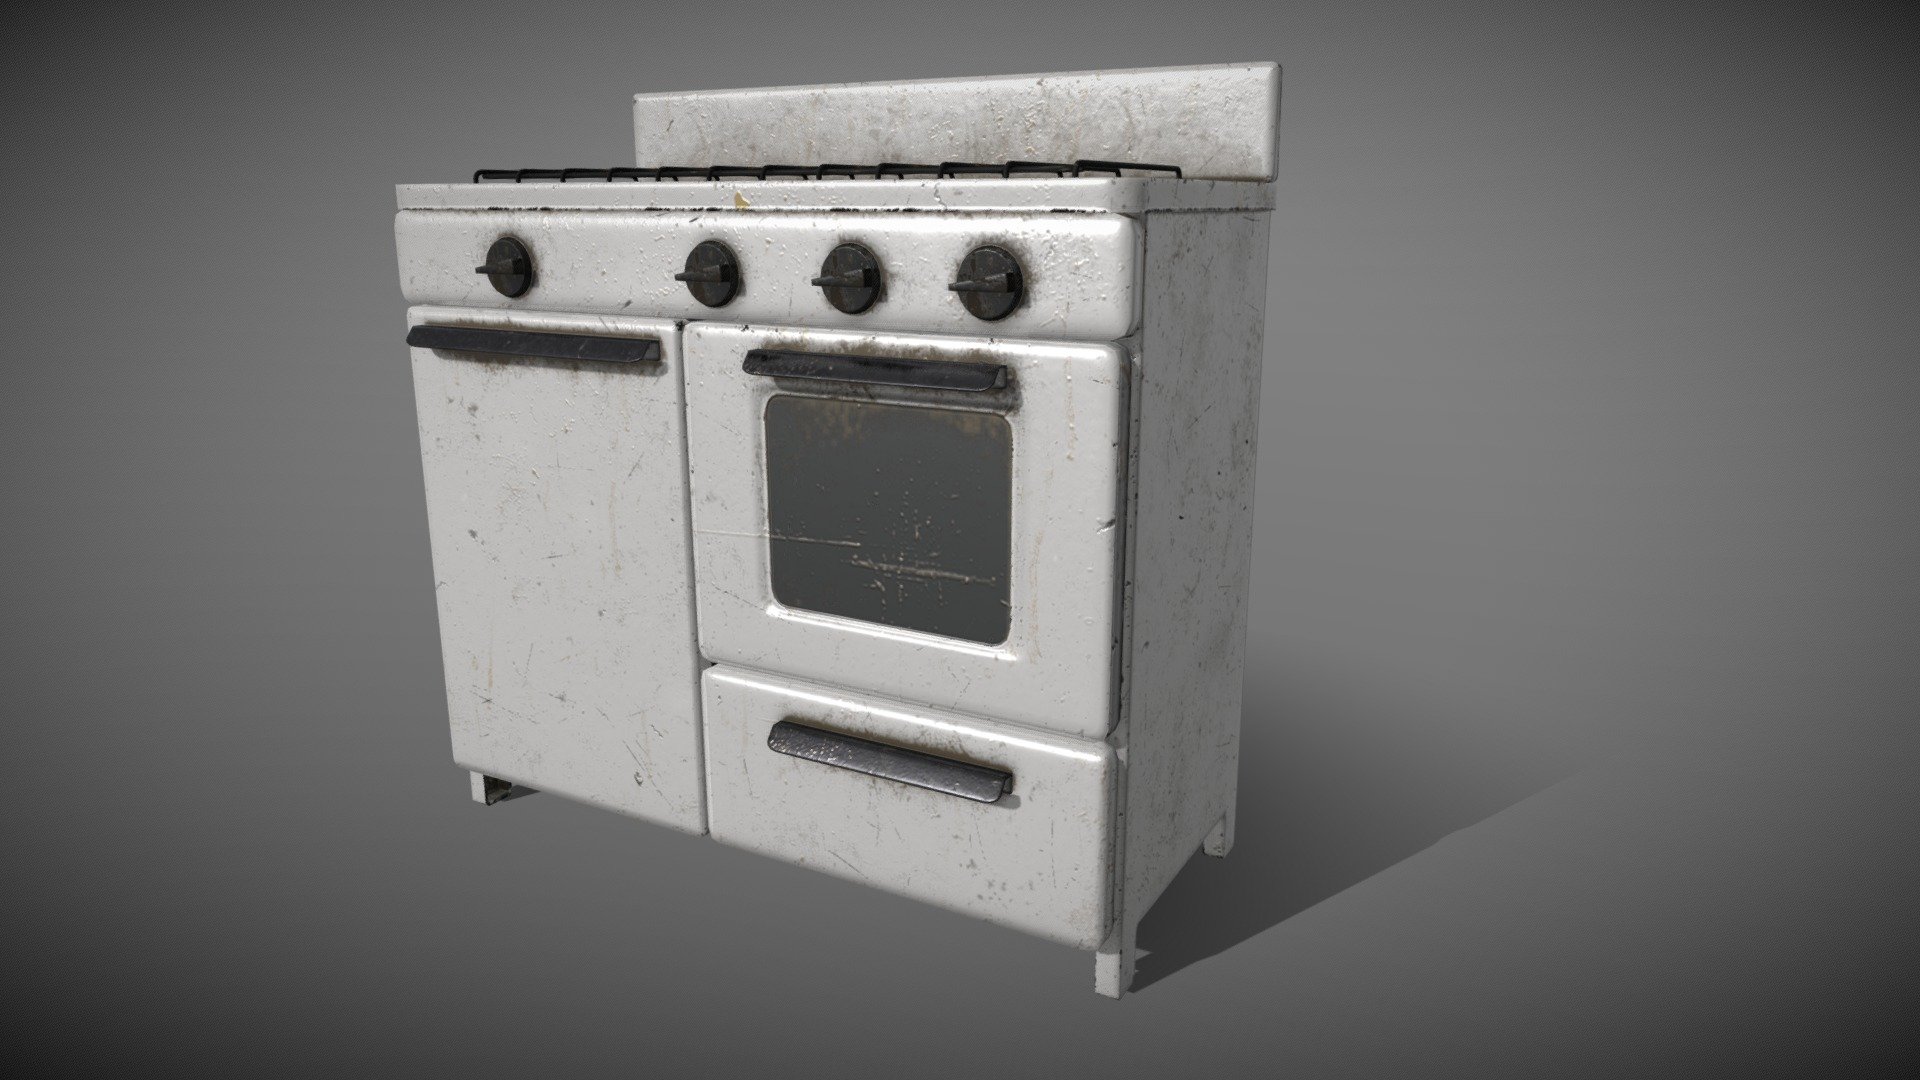 89,714 Traditional Stove Images, Stock Photos, 3D objects